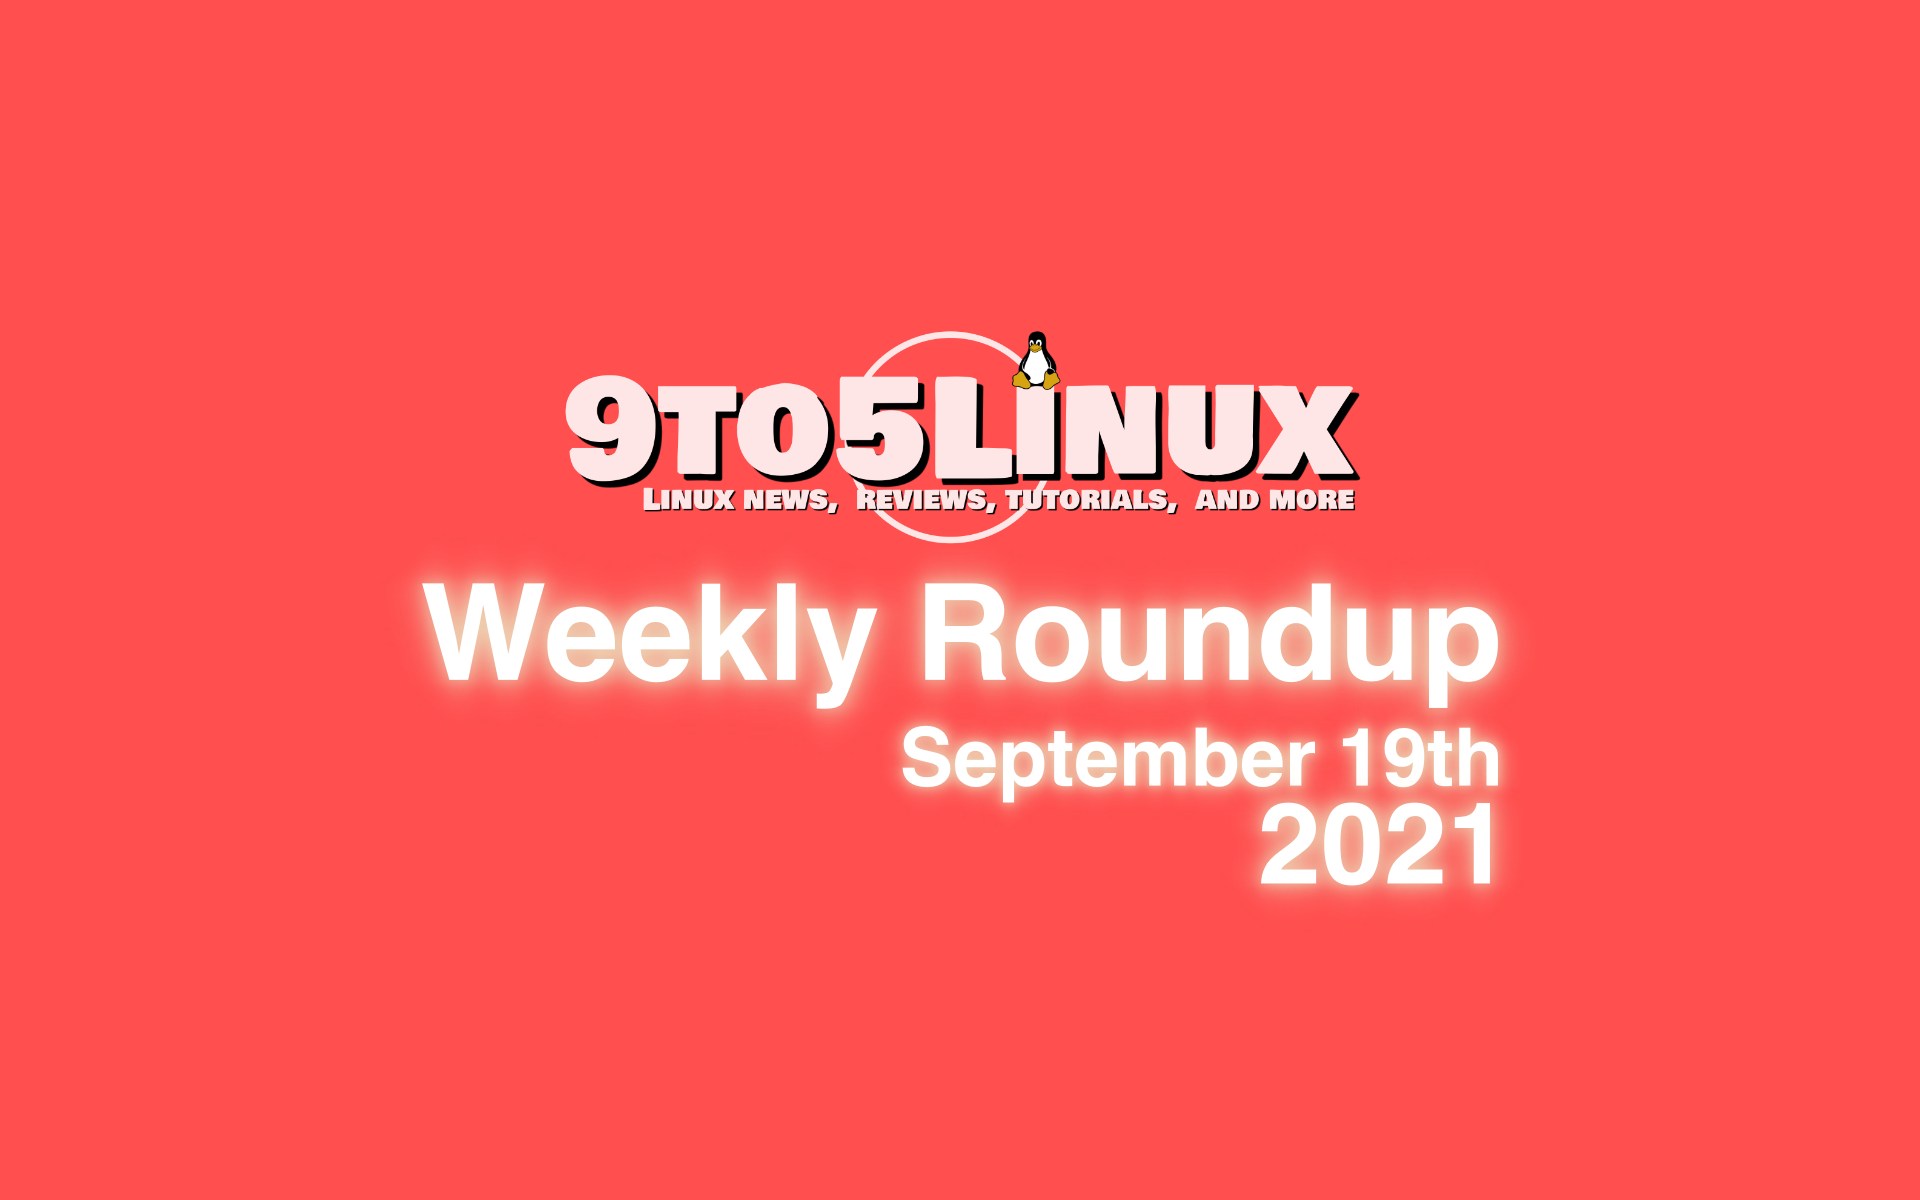 9to5Linux Weekly Roundup: September 19th, 2021